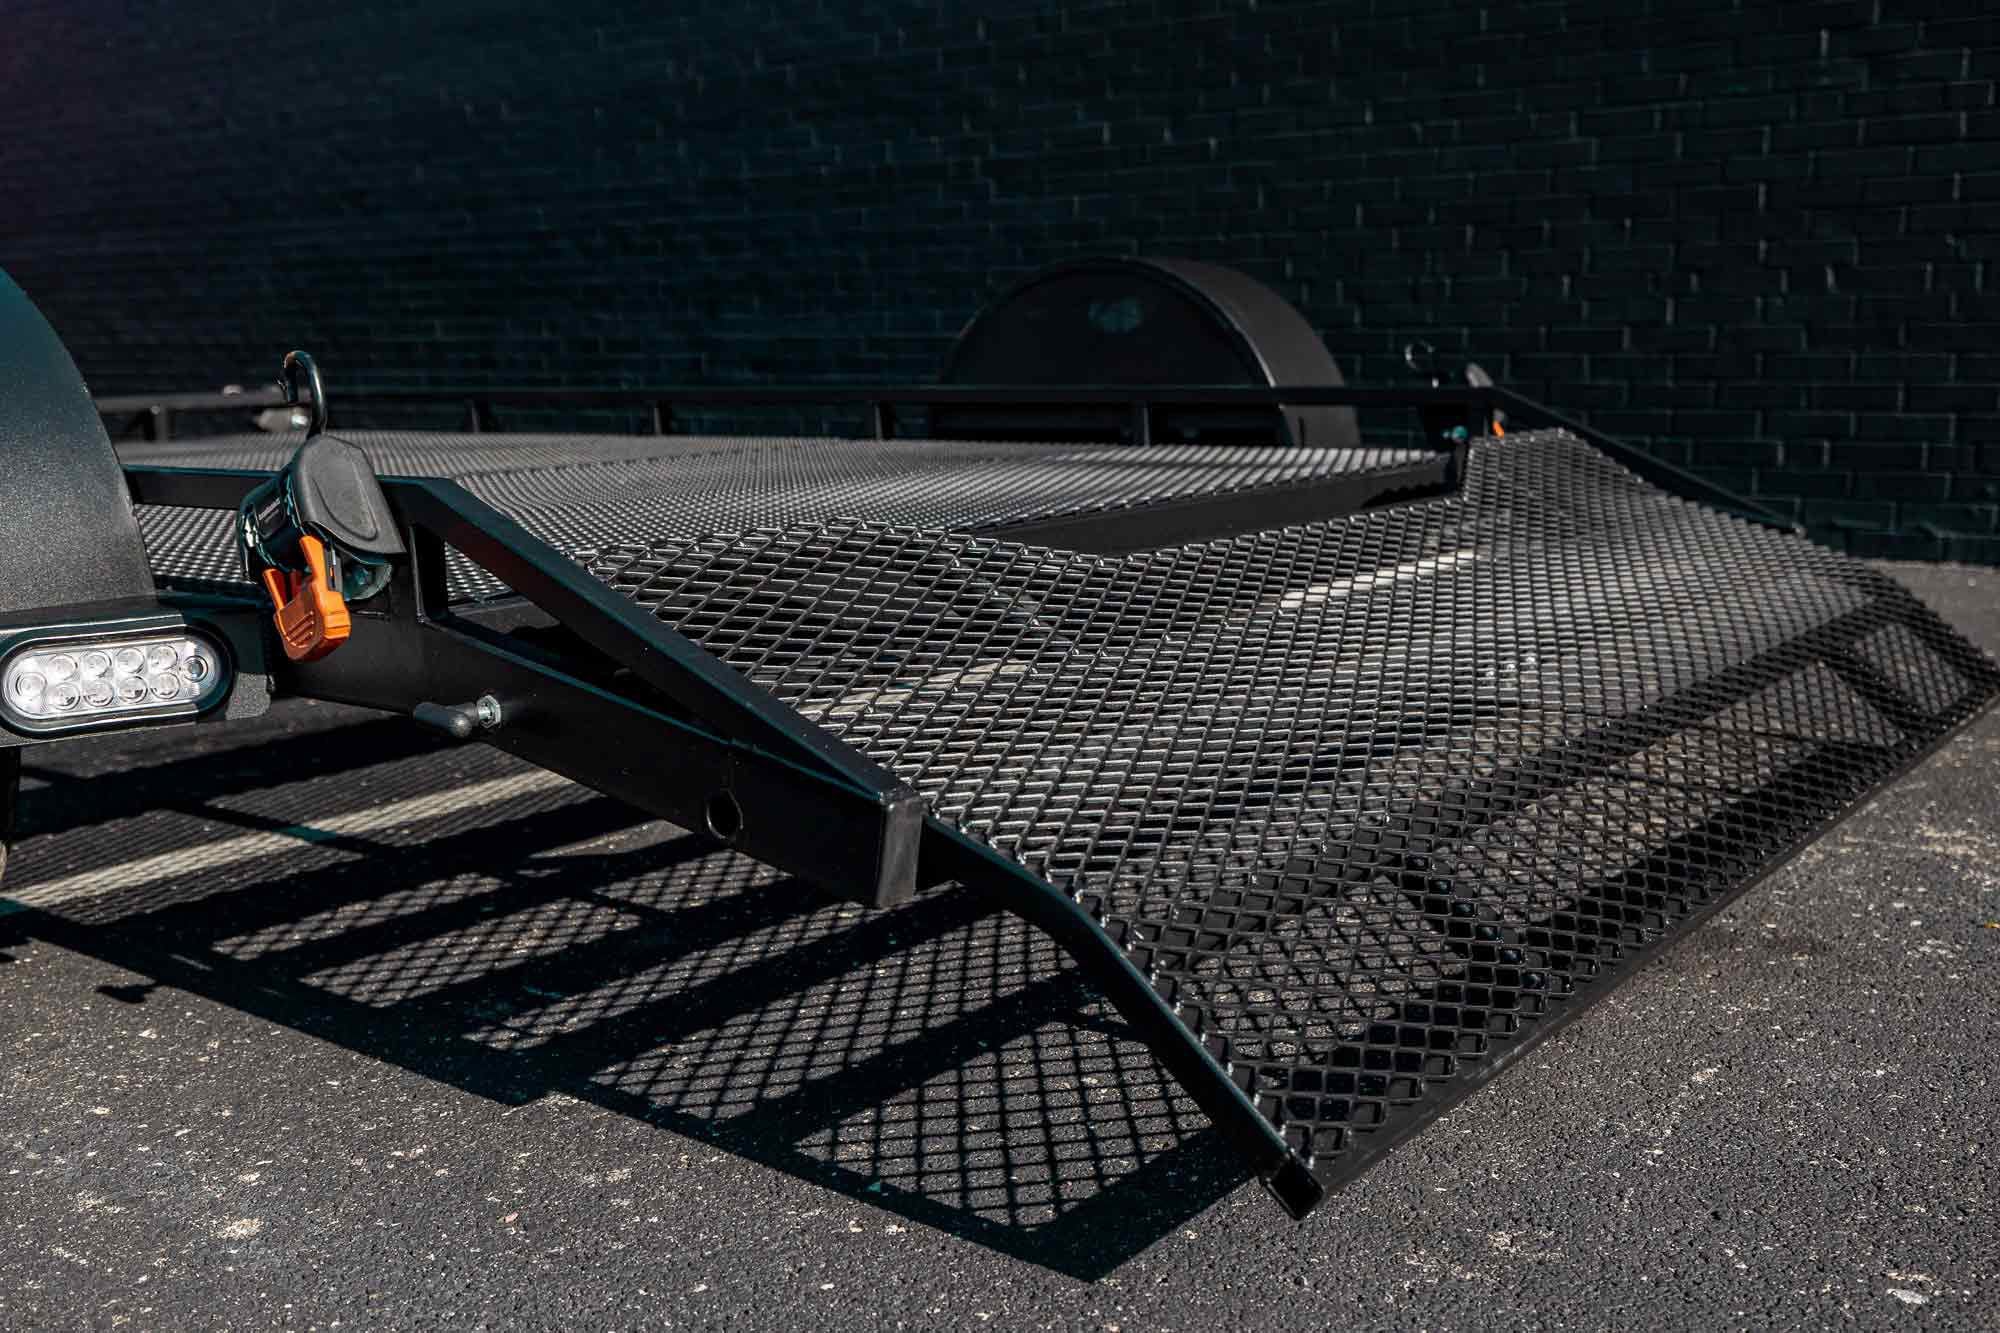 The patented rear ramp makes loading and unloading ultra simple.